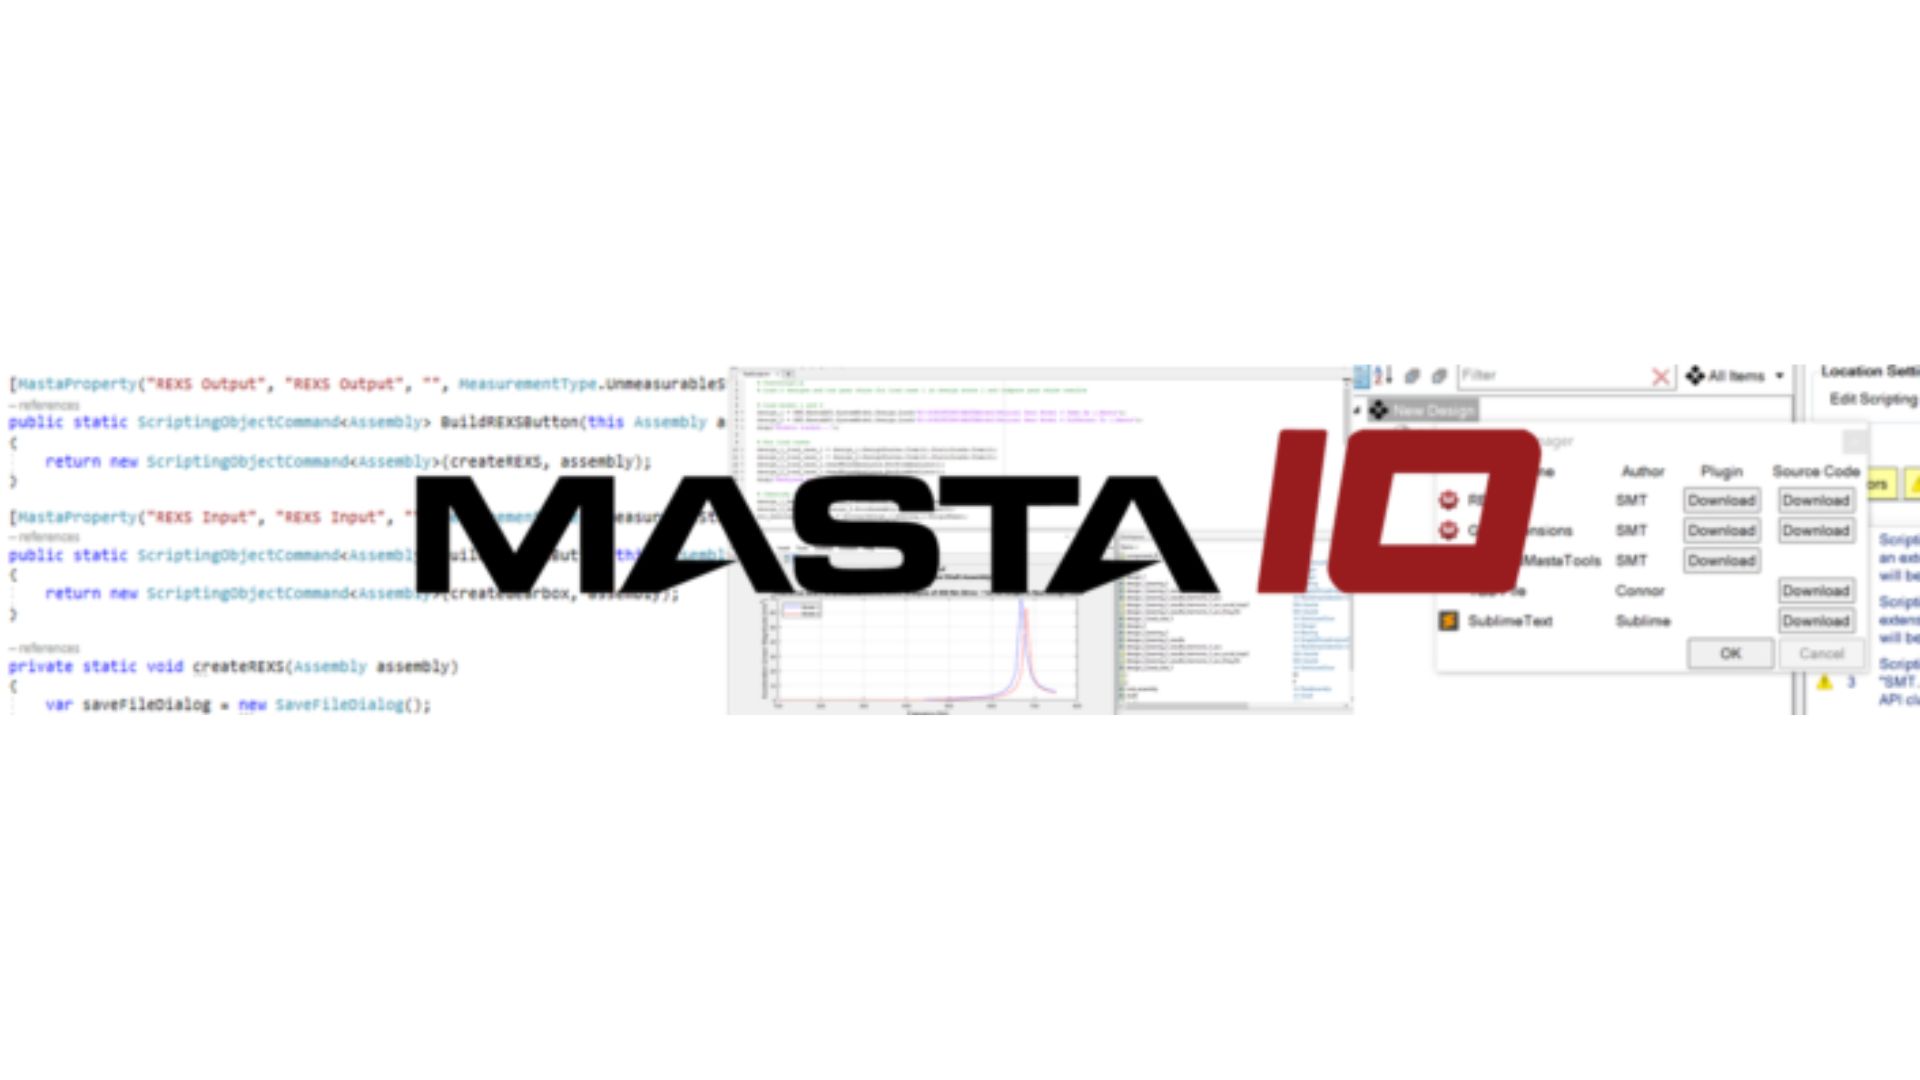 MASTA 10 logo and scripting in background.